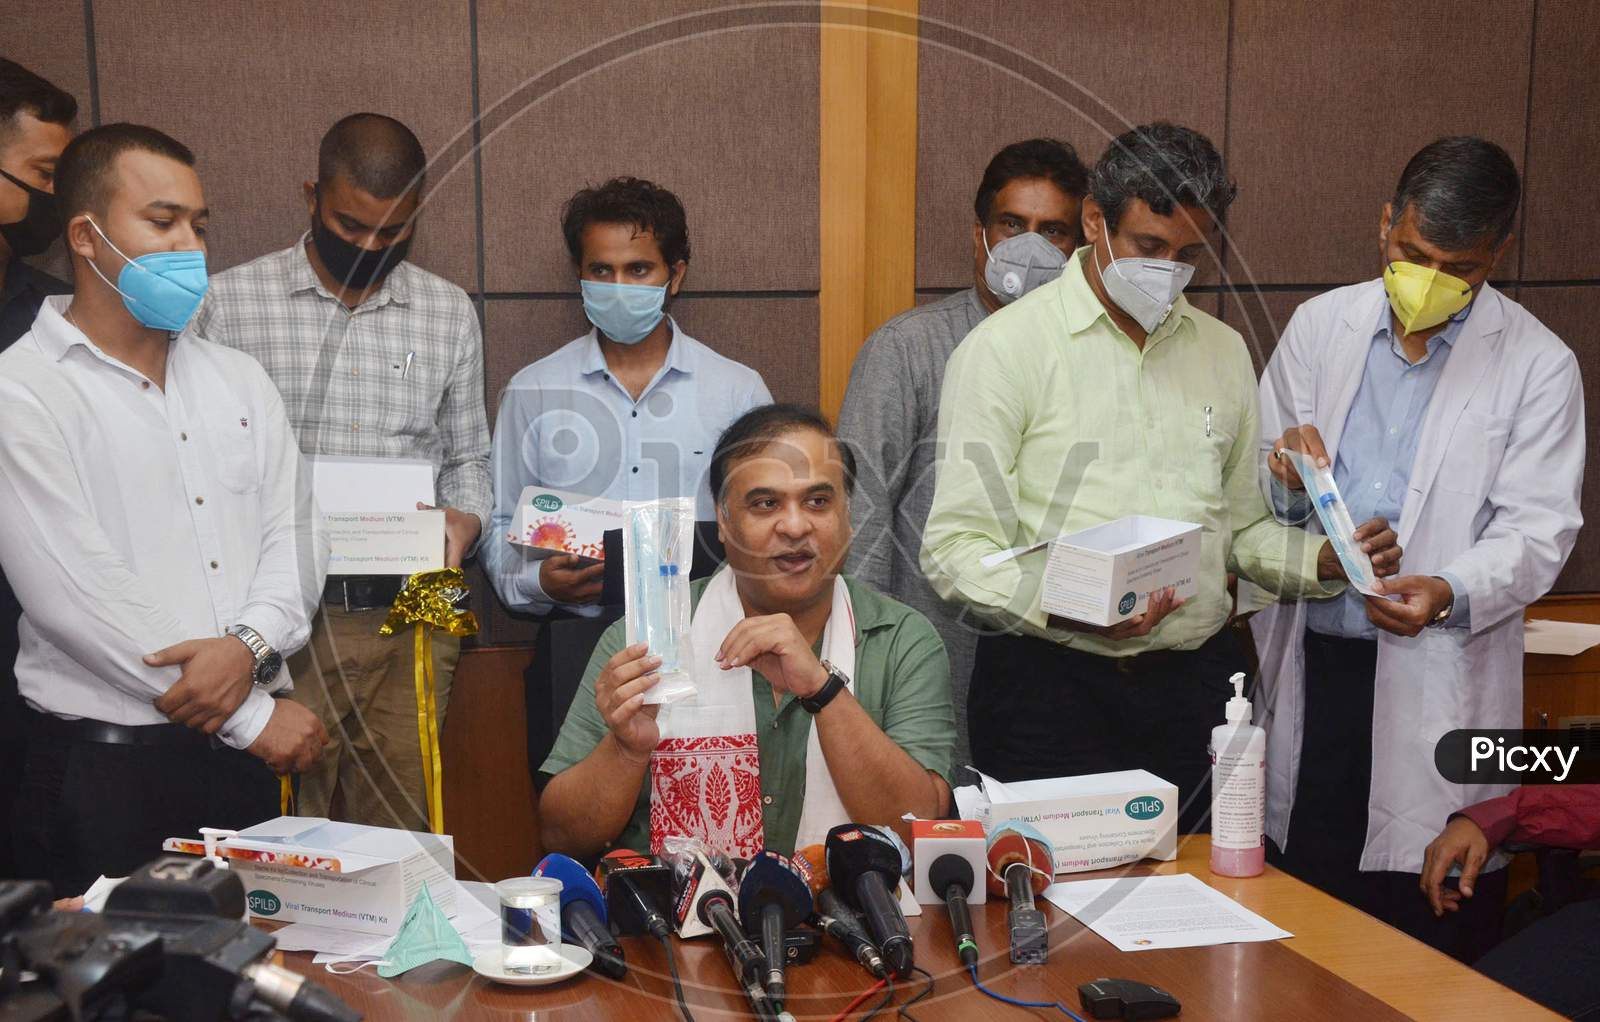 Assam State Minister Himanta Biswa Sarma speaks to media during the launch of the Viral Transport Media (VTM) kits, at Gauhati Medical College and Hospital (GMCH) in Guwahati , Wednesday, June 17, 2020.